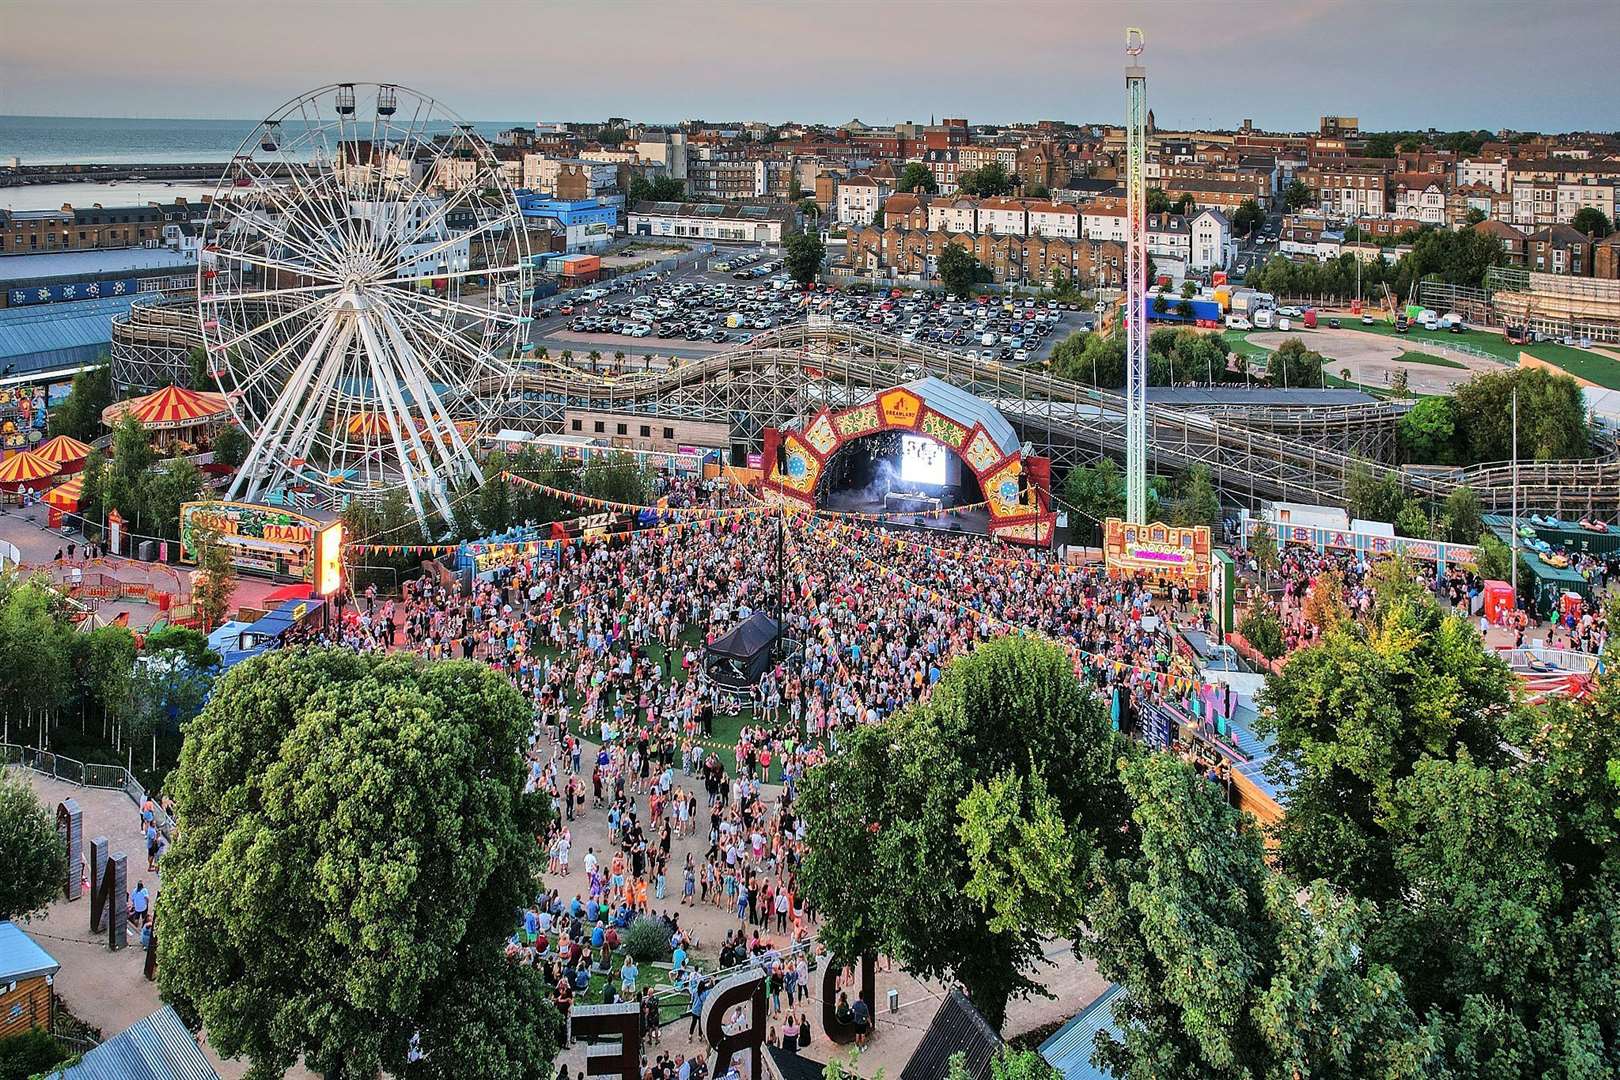 It is understood the teenager had attended a concert at Dreamland in Margate. Picture: Dreamland